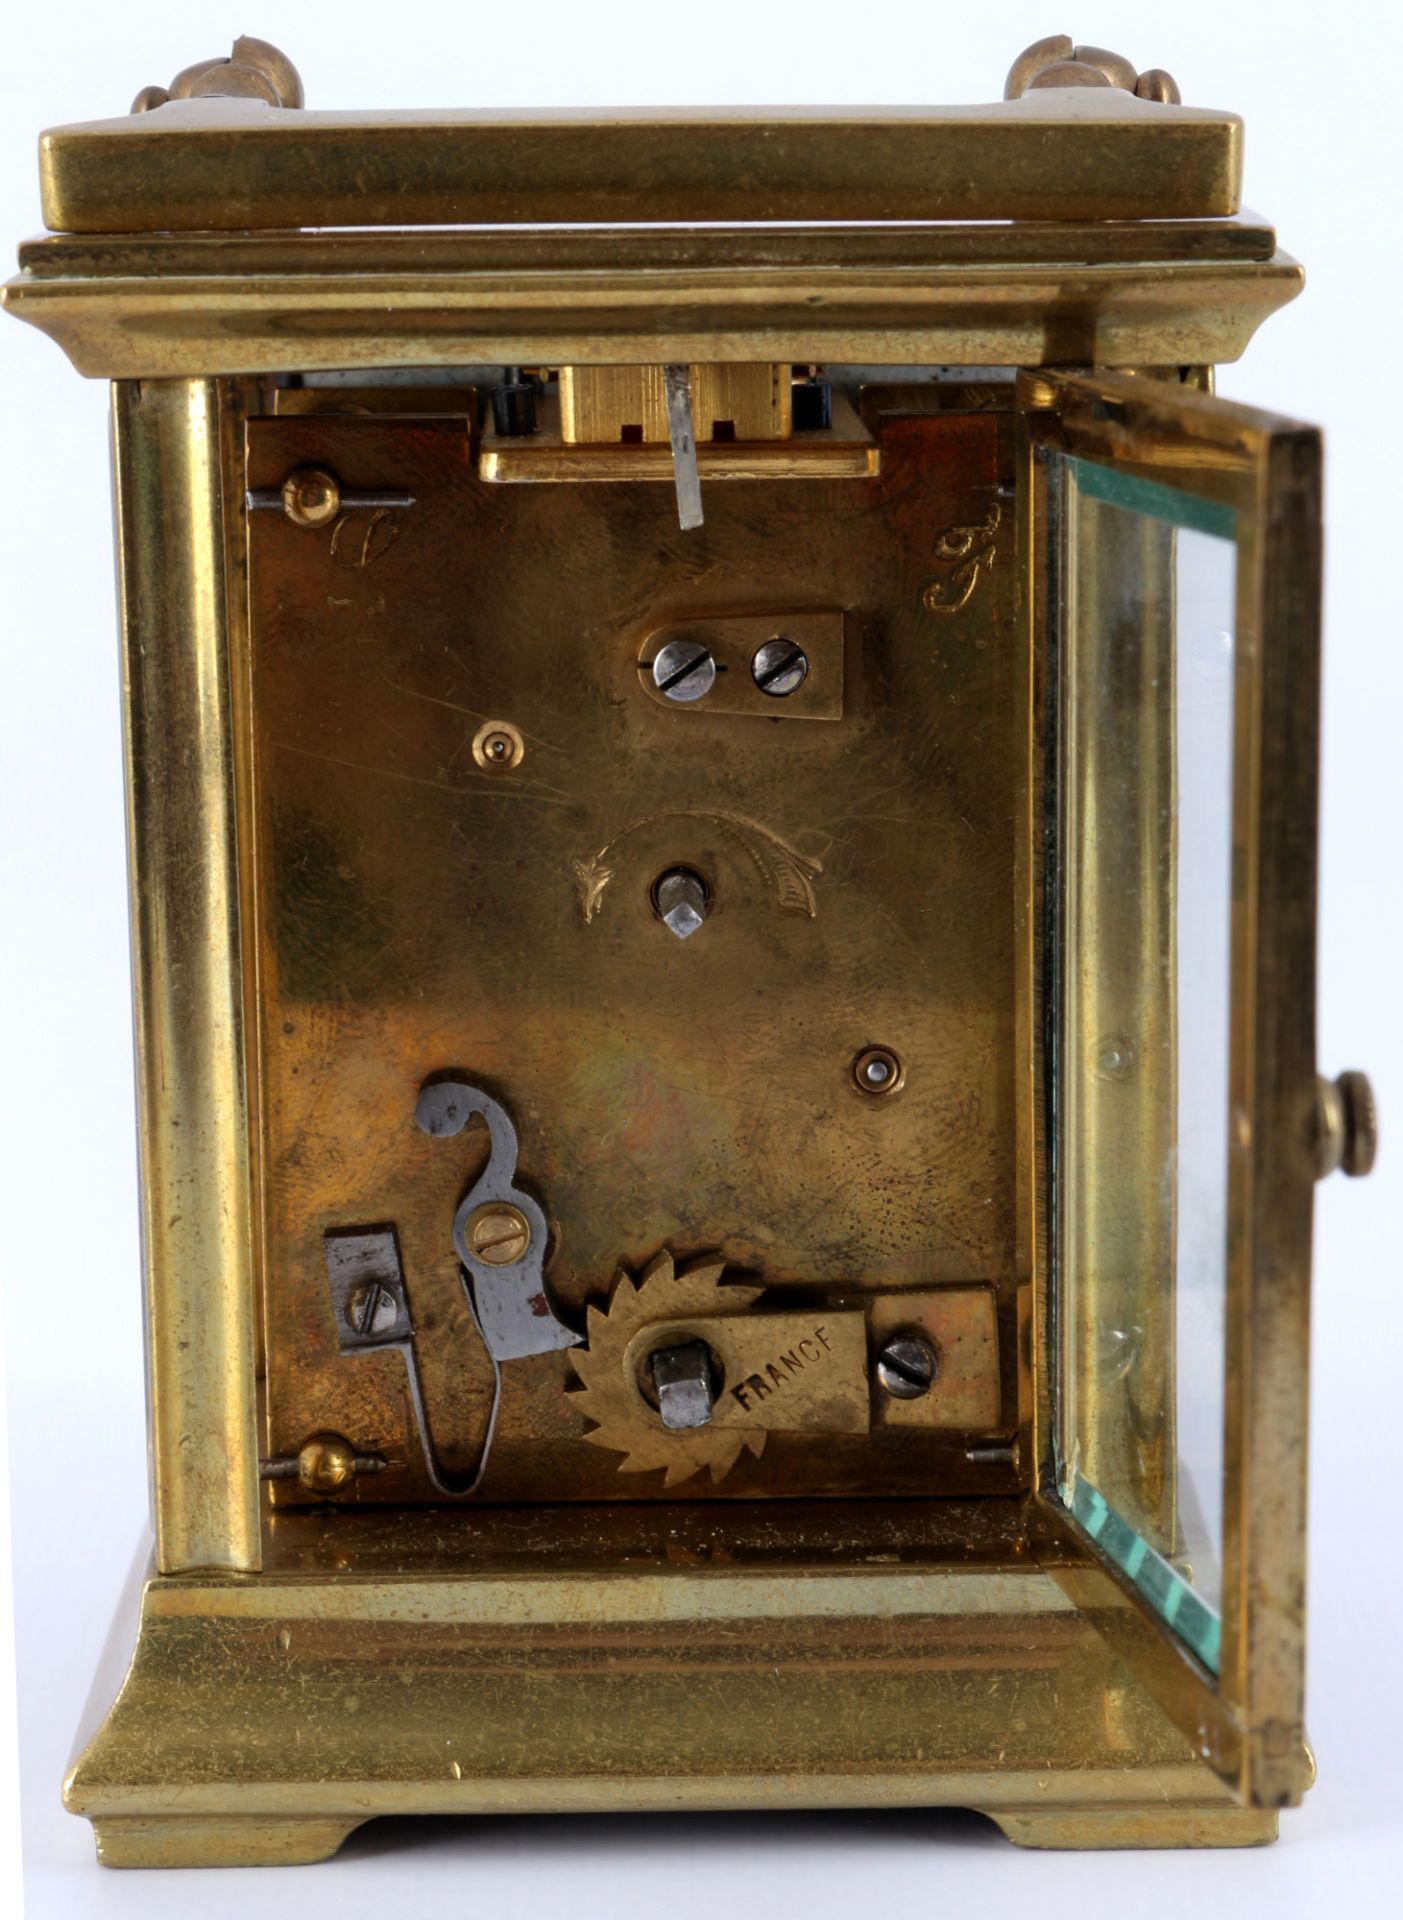 Carriage clock, France around 1900, - Image 6 of 8